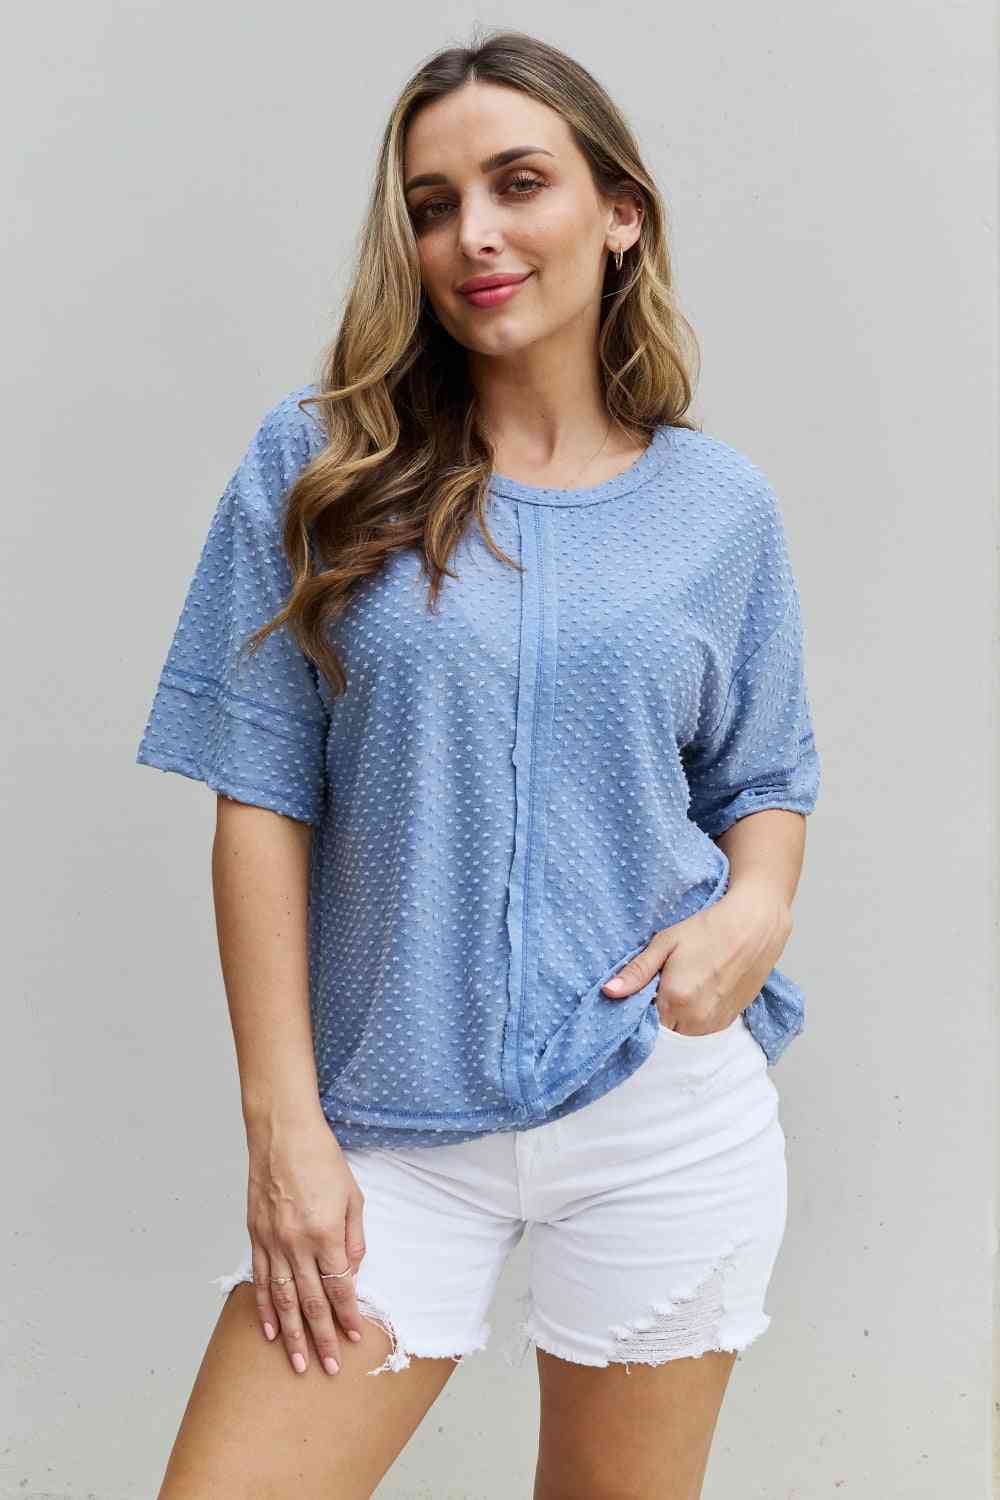 Cater 2 You Swiss Dot Reverse Stitch Short Sleeve Top - Blue / S - Camis & Tops - Shirts & Tops - 1 - 2024